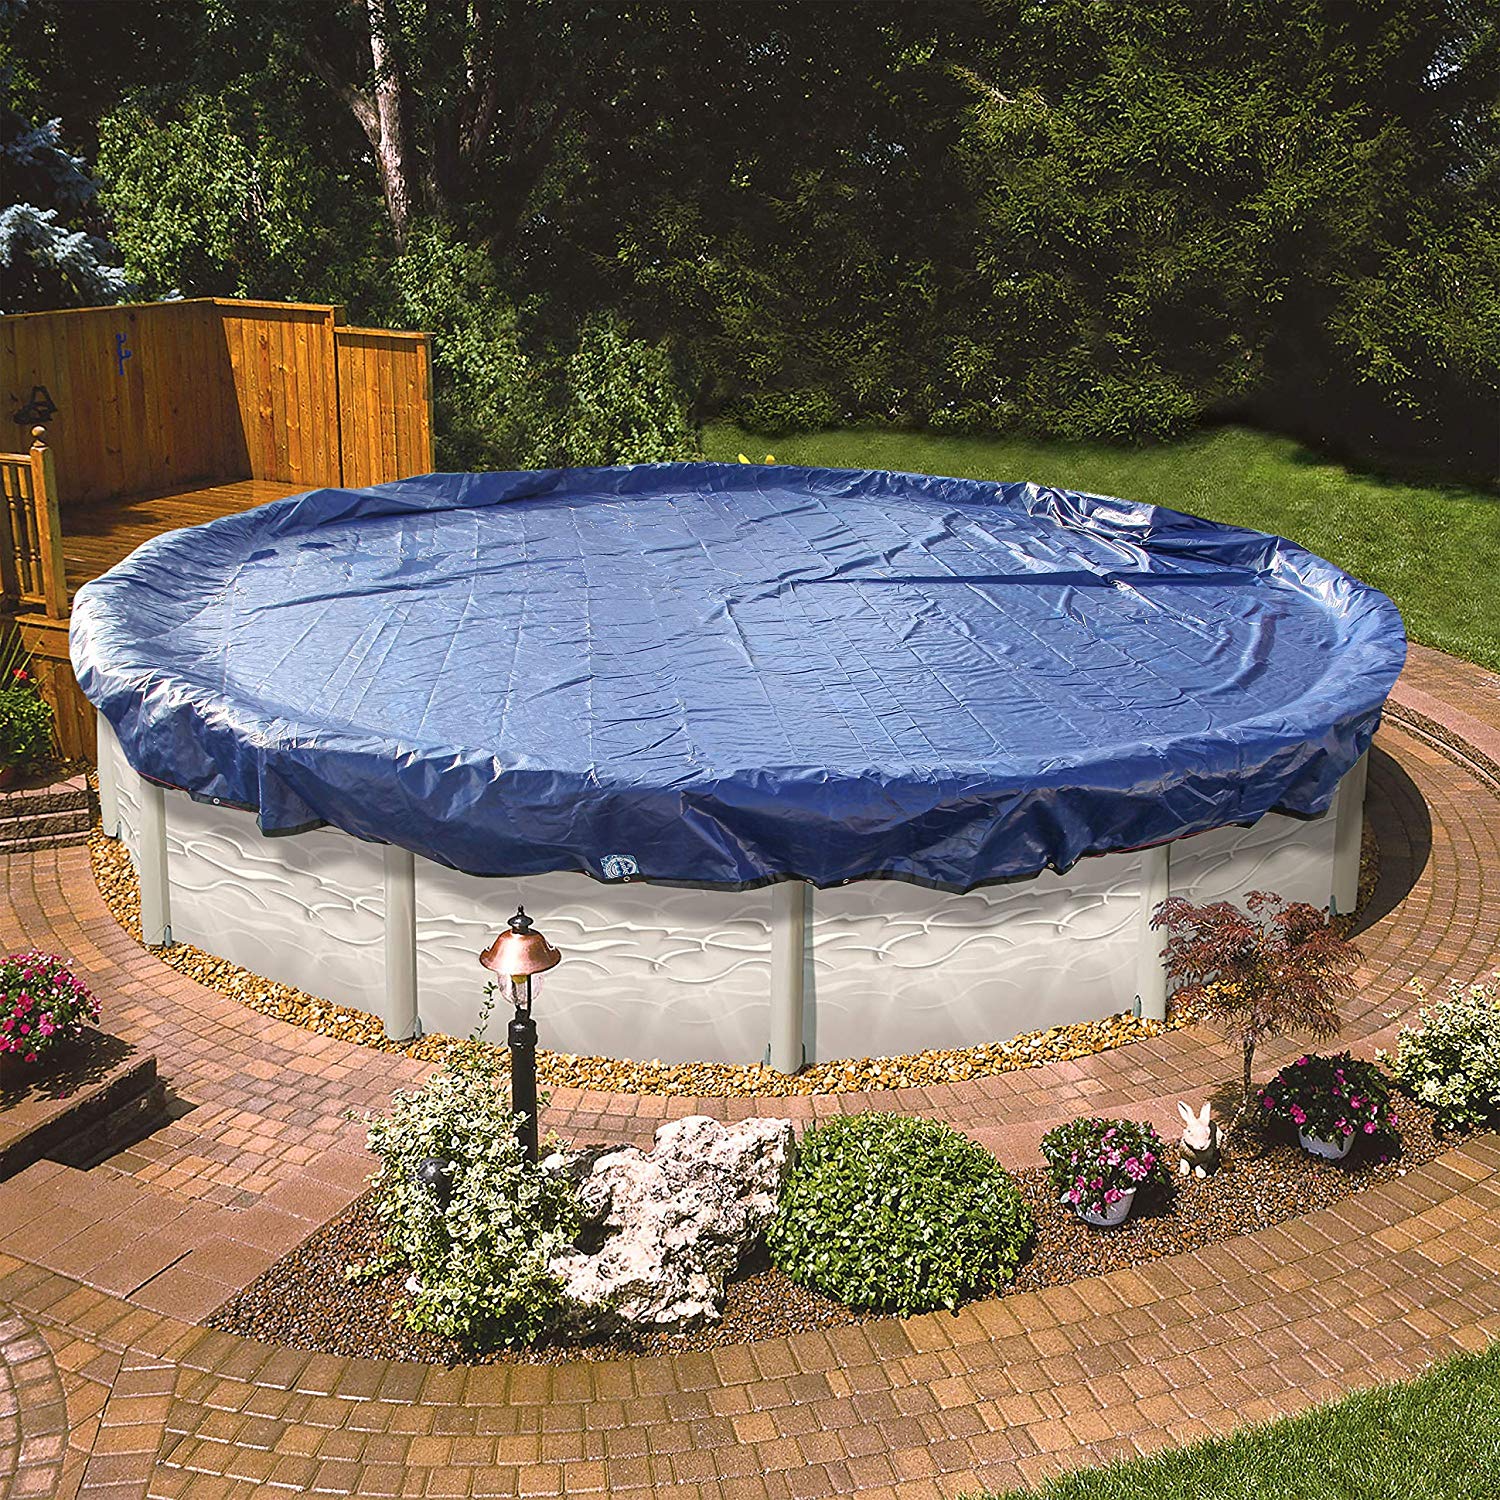 How To Winterize Above Ground Pool Intex Closing A Pool 4 Steps and 4 Days | Sunny's Pool and More!